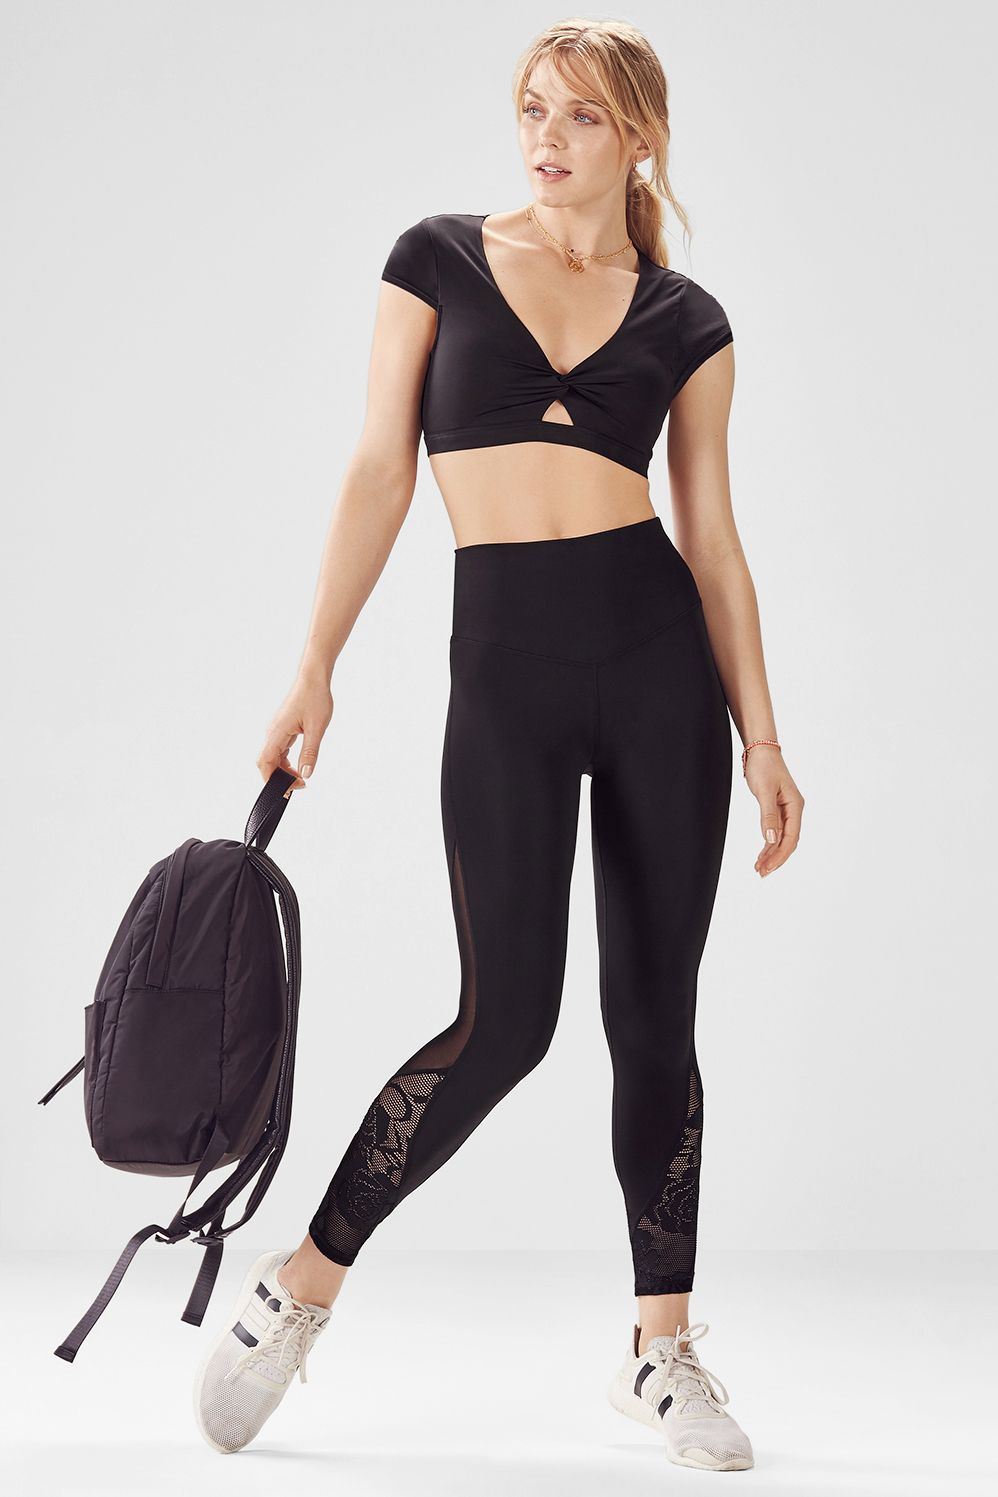 Fabletics Vicar Womens Black One Size Fits Most Outfit | Fabletics